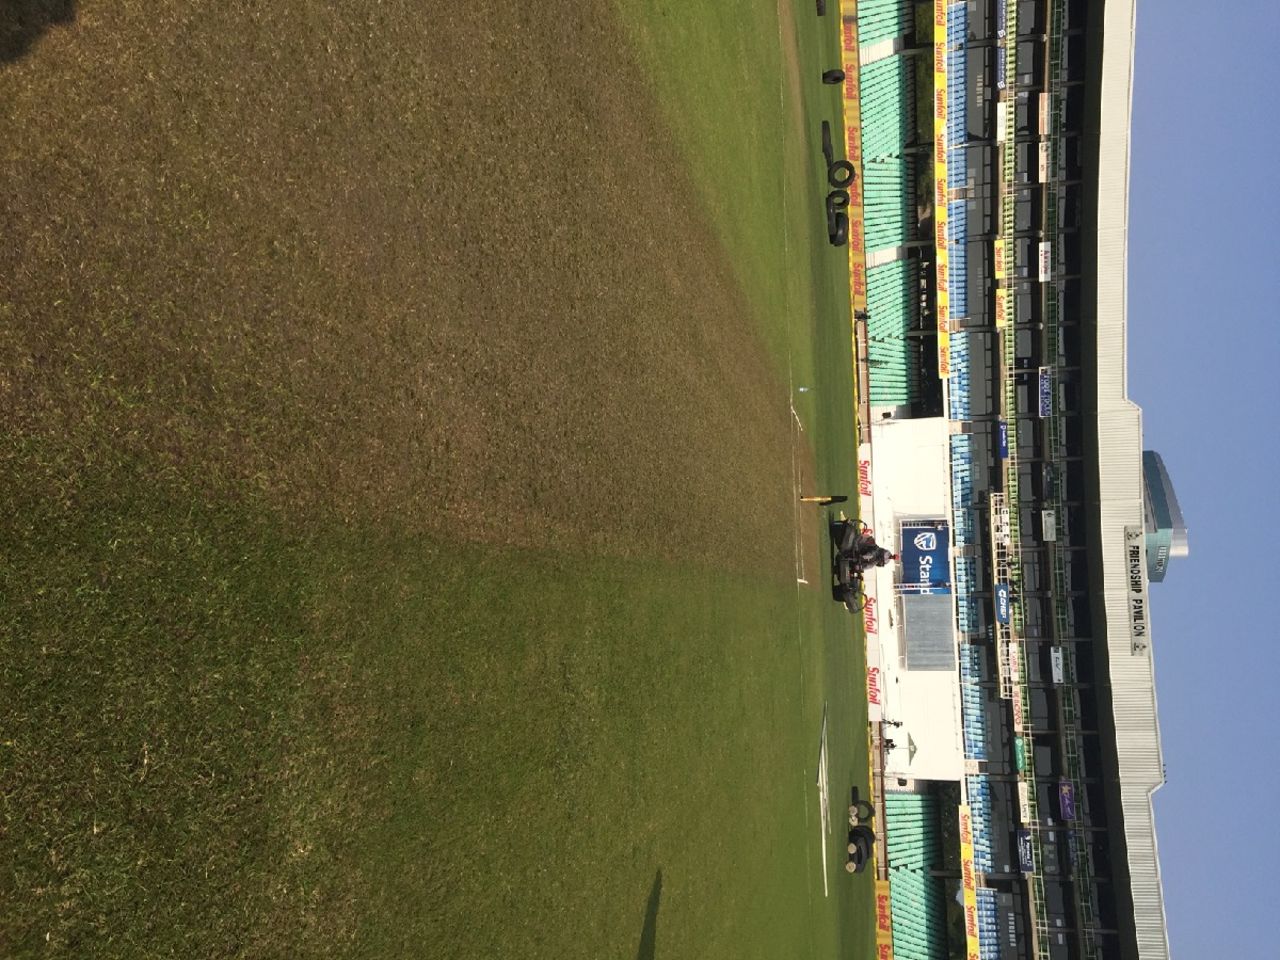 The surface at Kingsmead had a smattering of grass, Durban, August 18, 2016